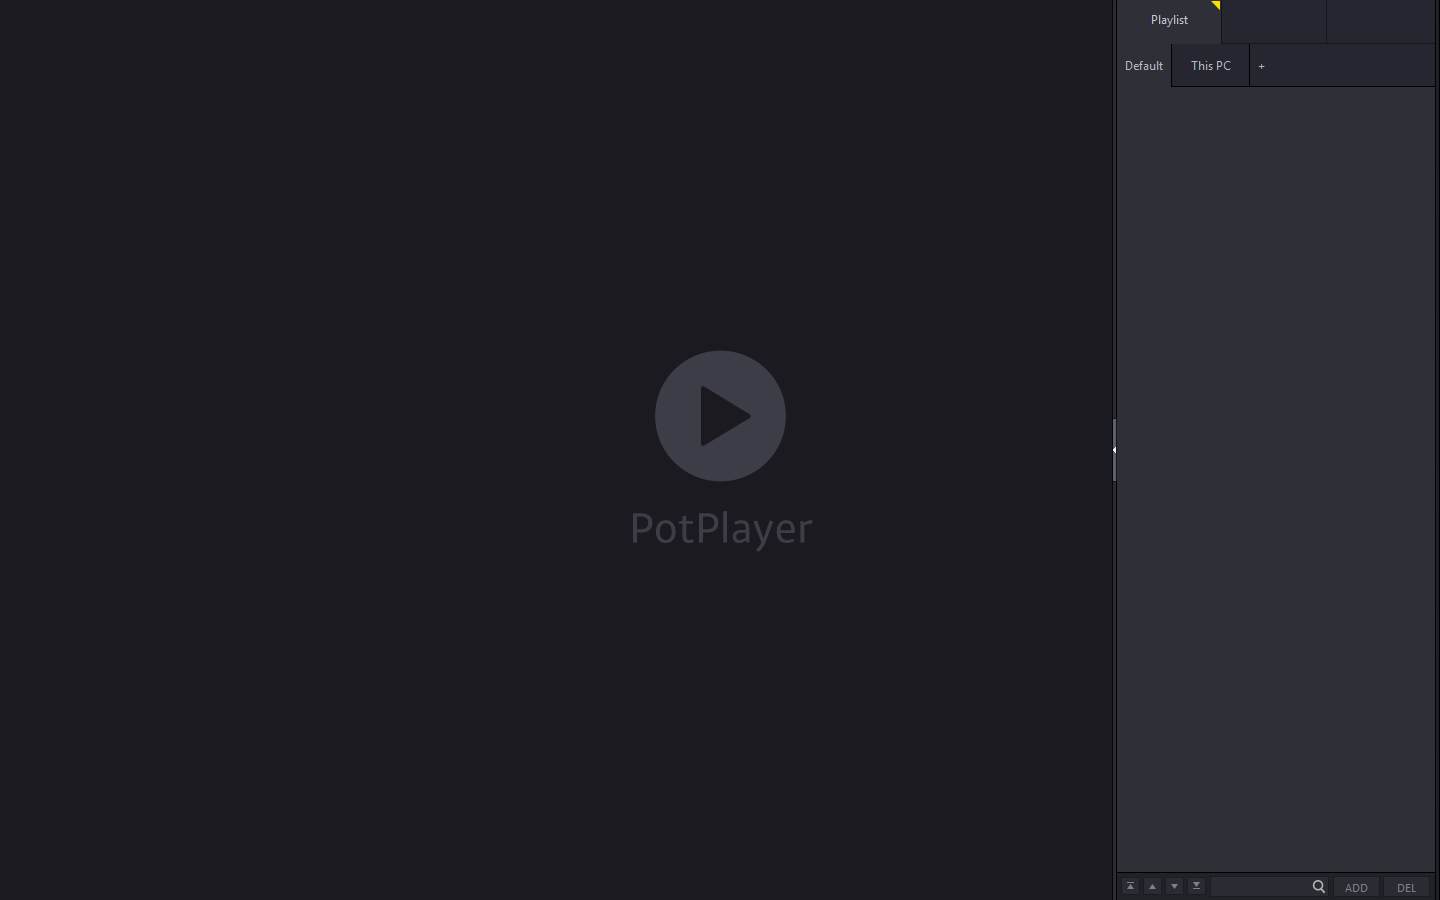 download the last version for android Daum PotPlayer 1.7.21953